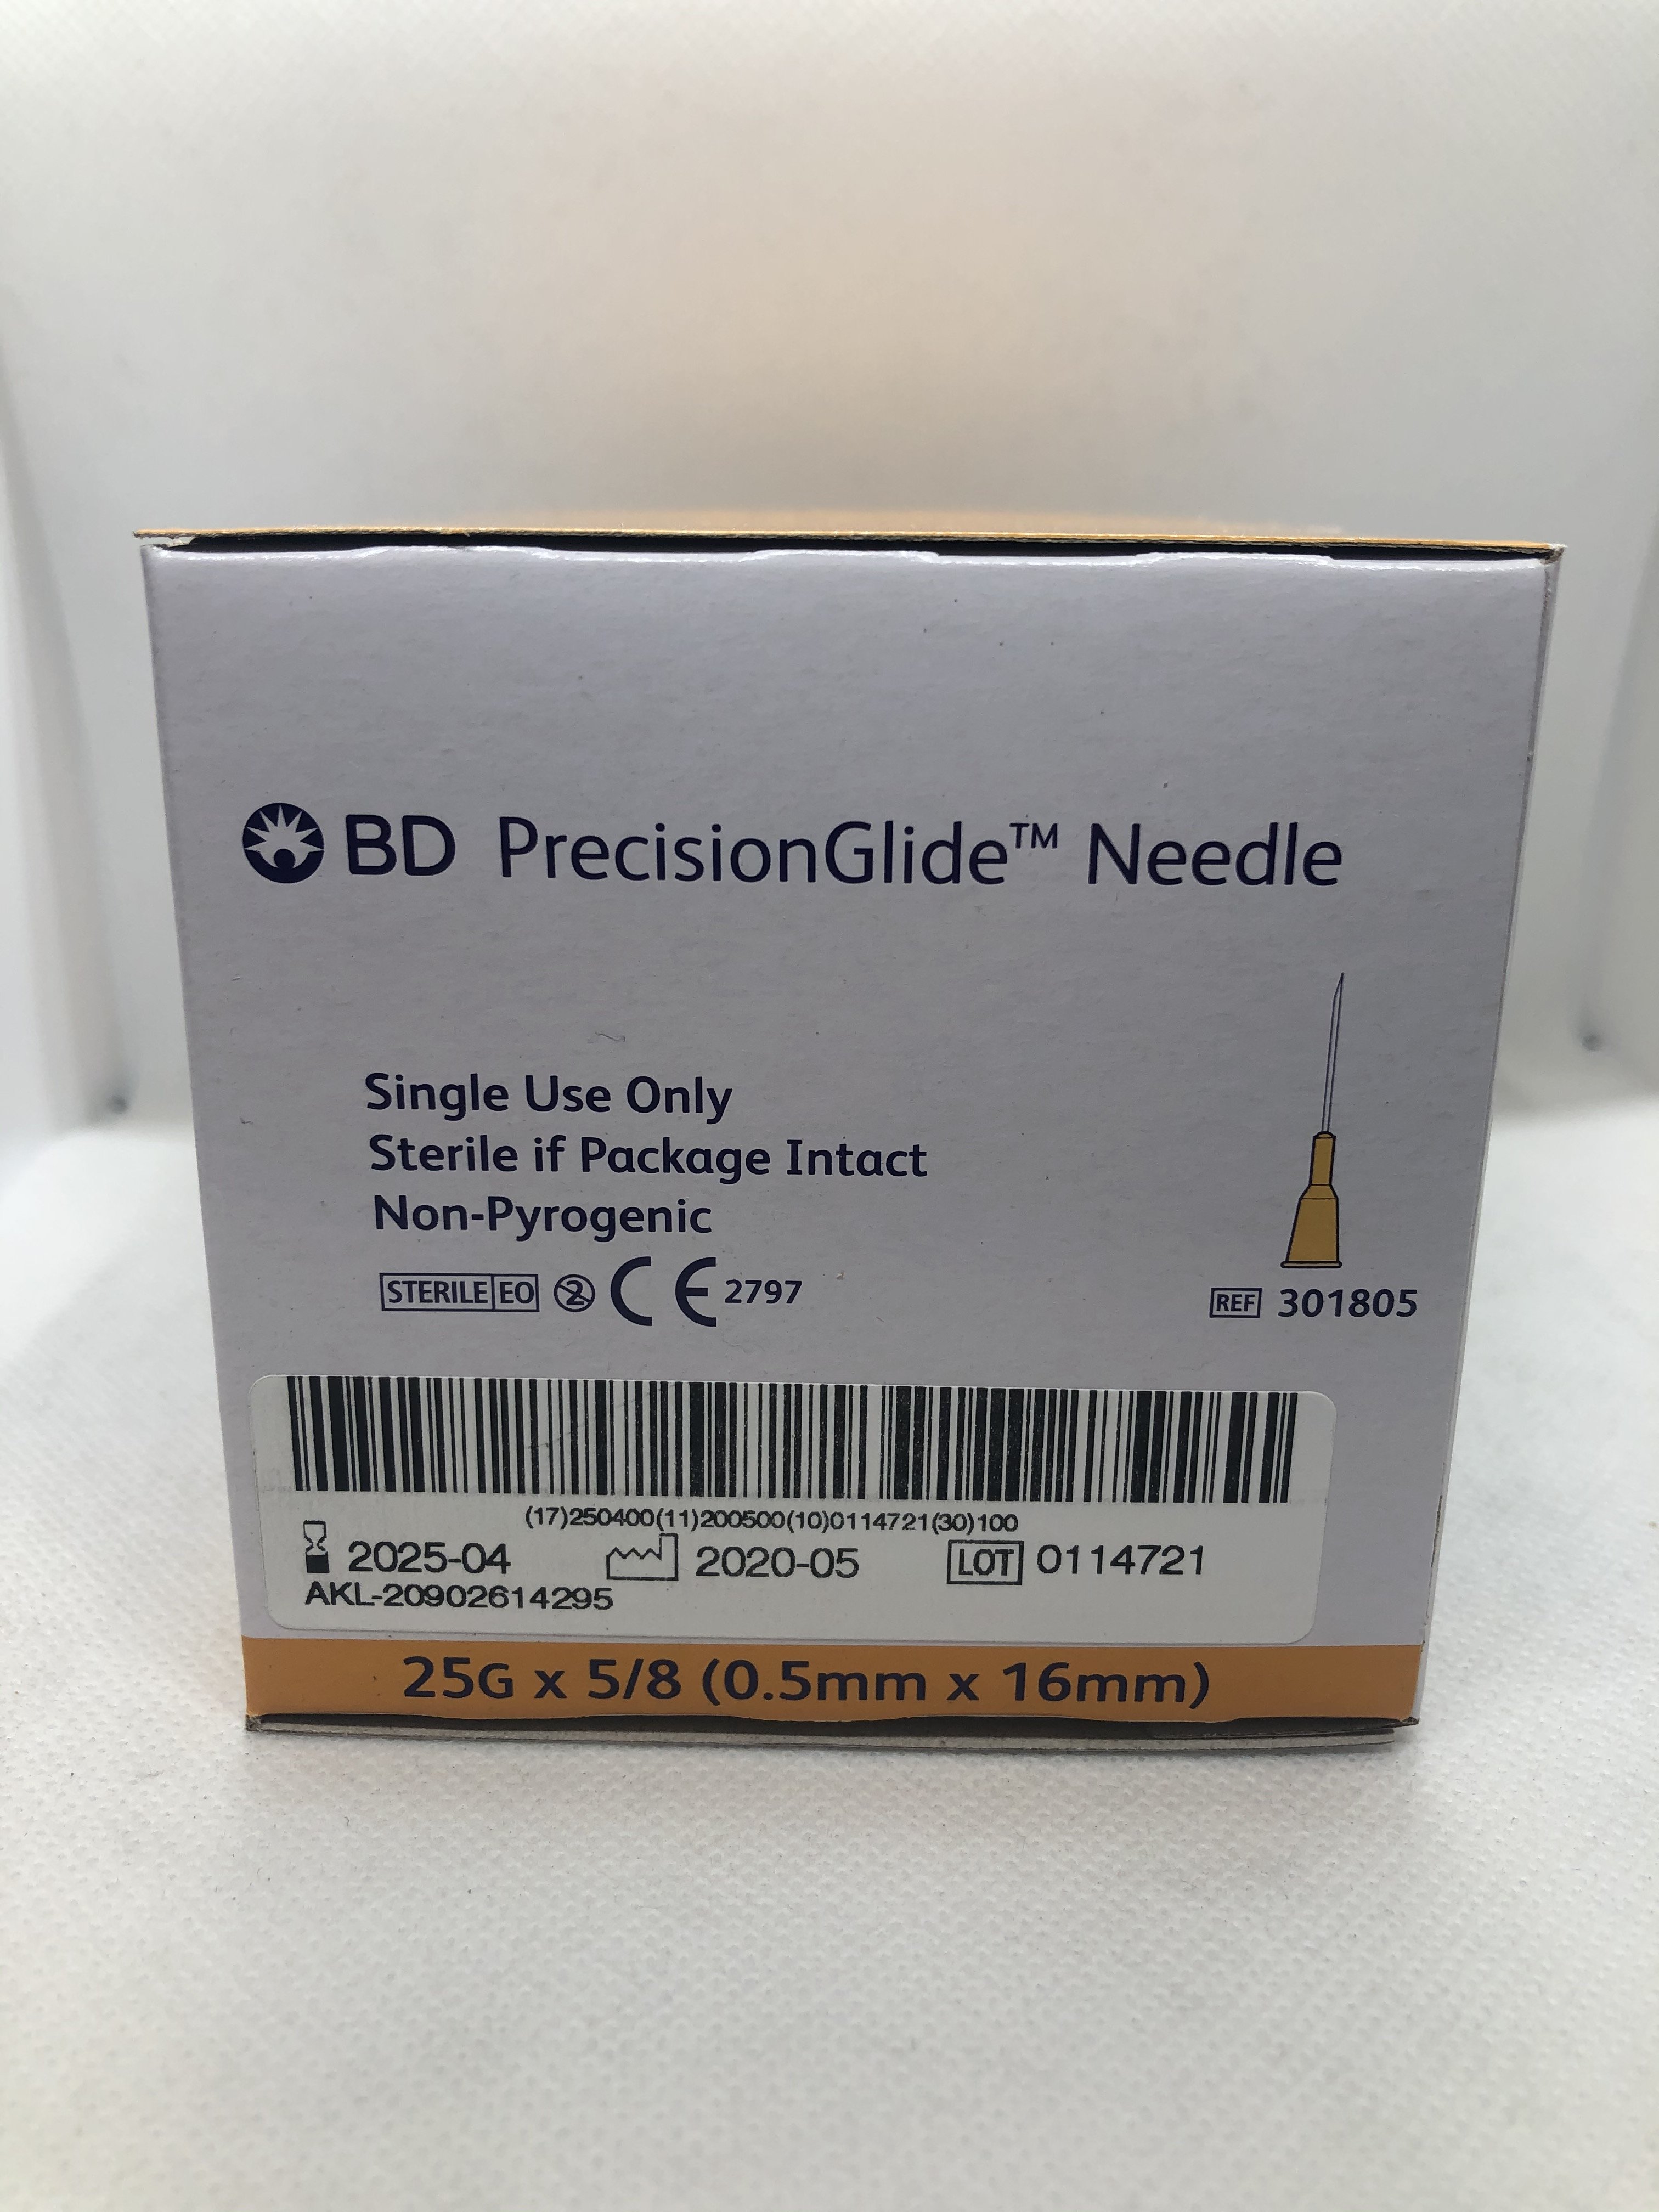 BD PRECISIONGLIDE NEEDLE 25G X 16MM, 100